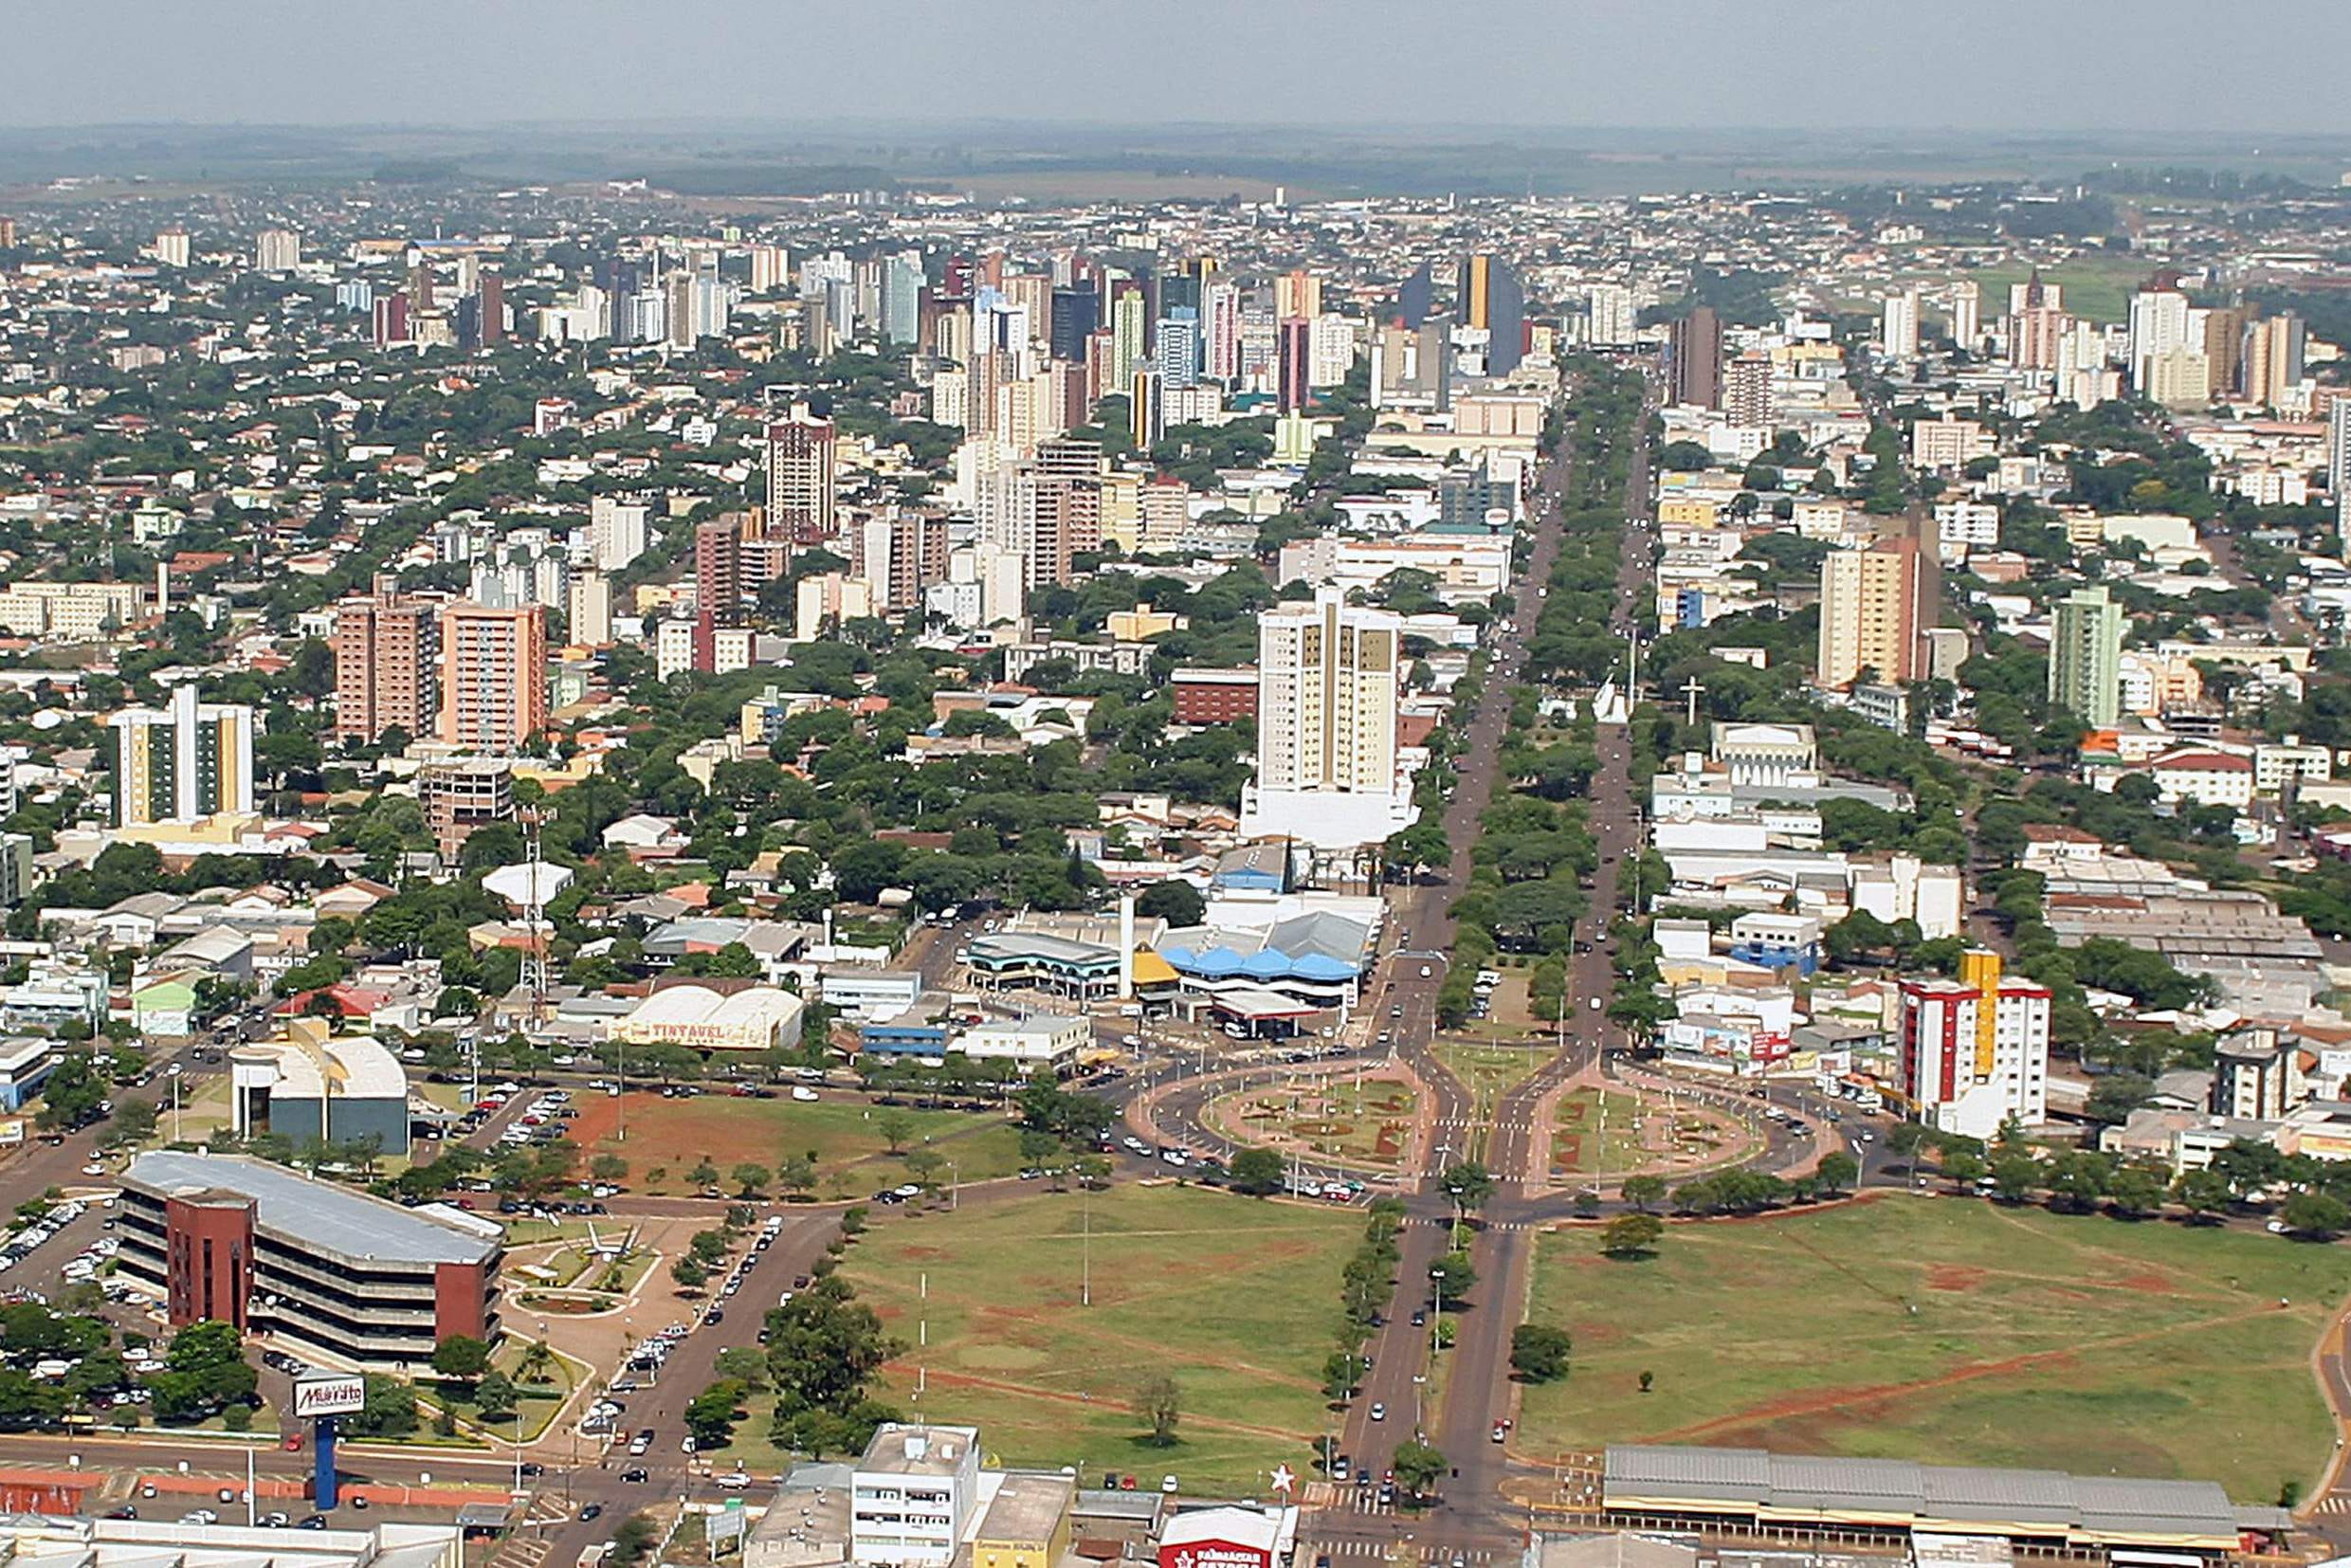 City of Cascavel in Paraná.